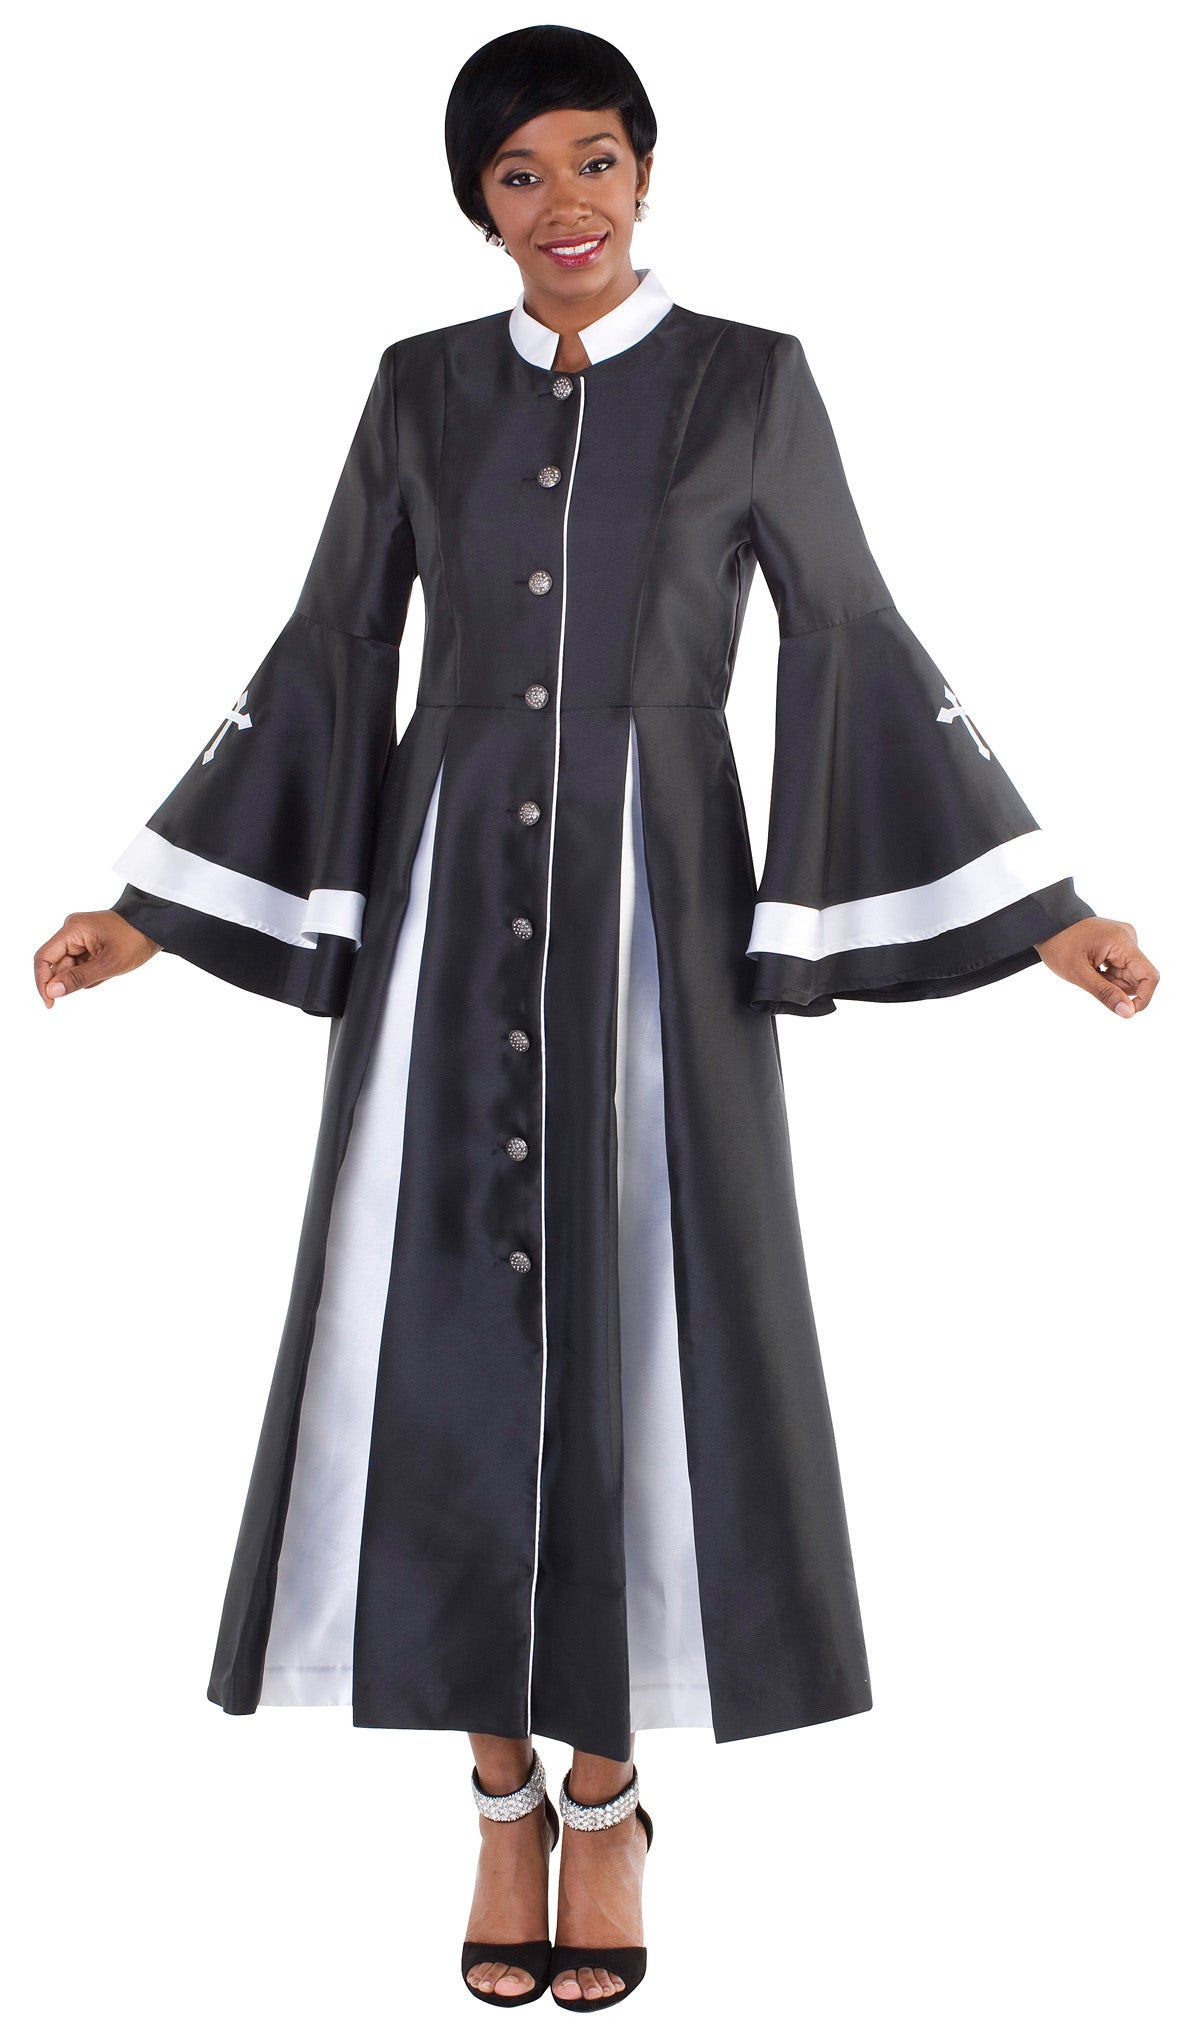 Tally Taylor Robe 4615C-Black/White - Church Suits For Less